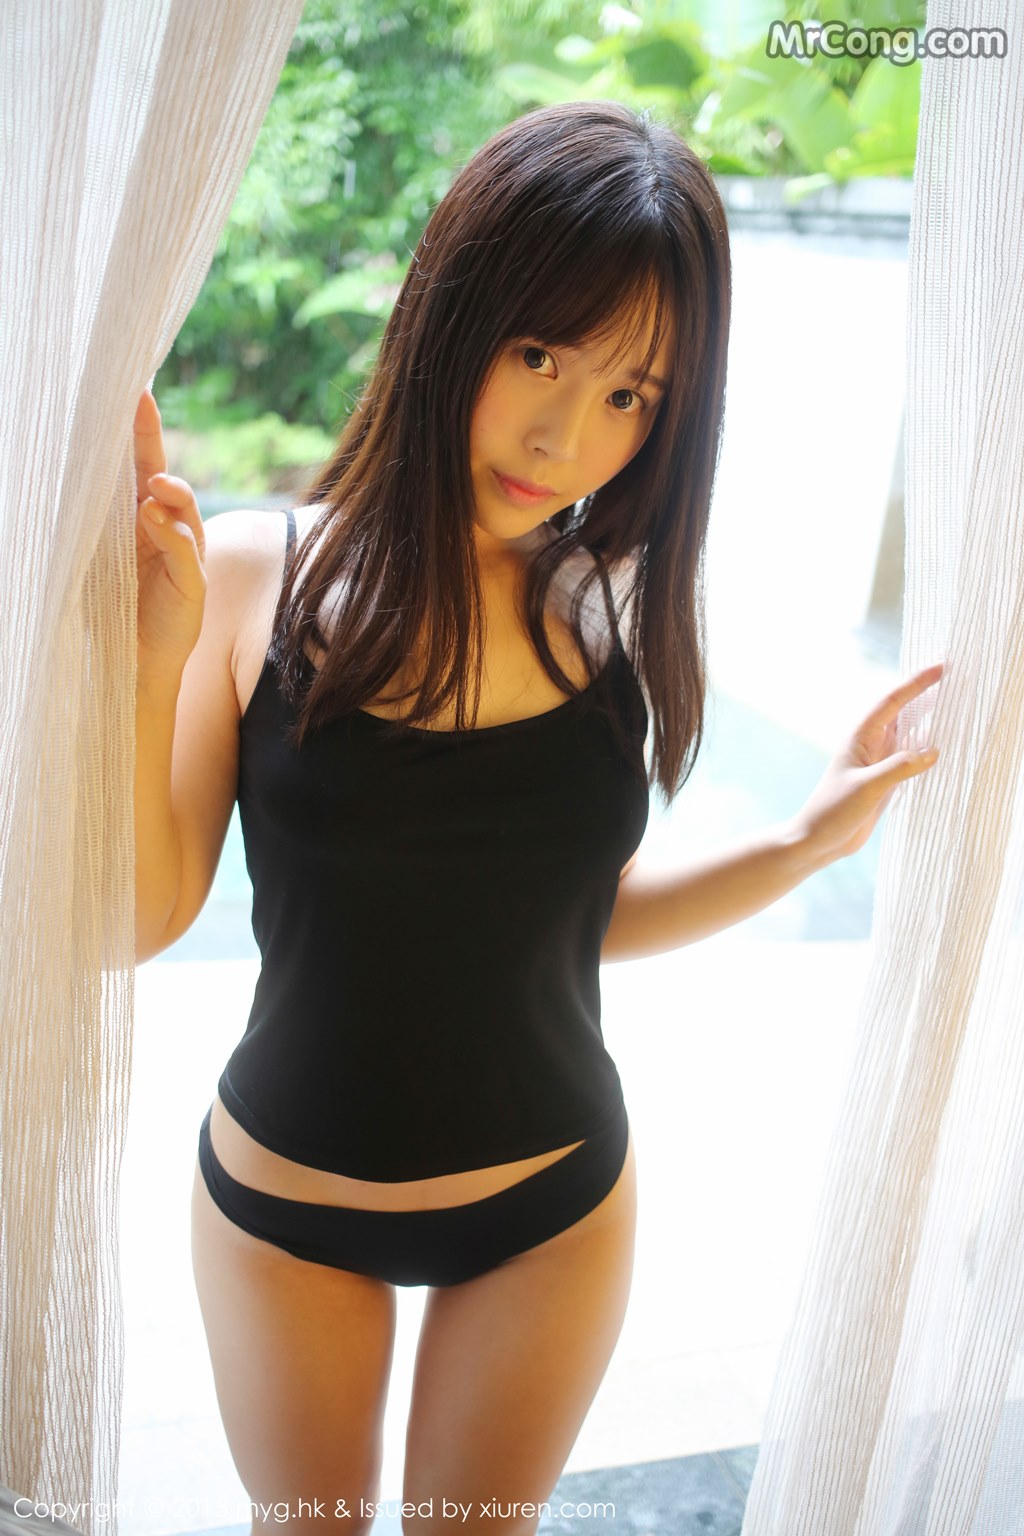 MyGirl Vol.173: Model Evelyn (艾莉) (94 pictures) photo 3-7